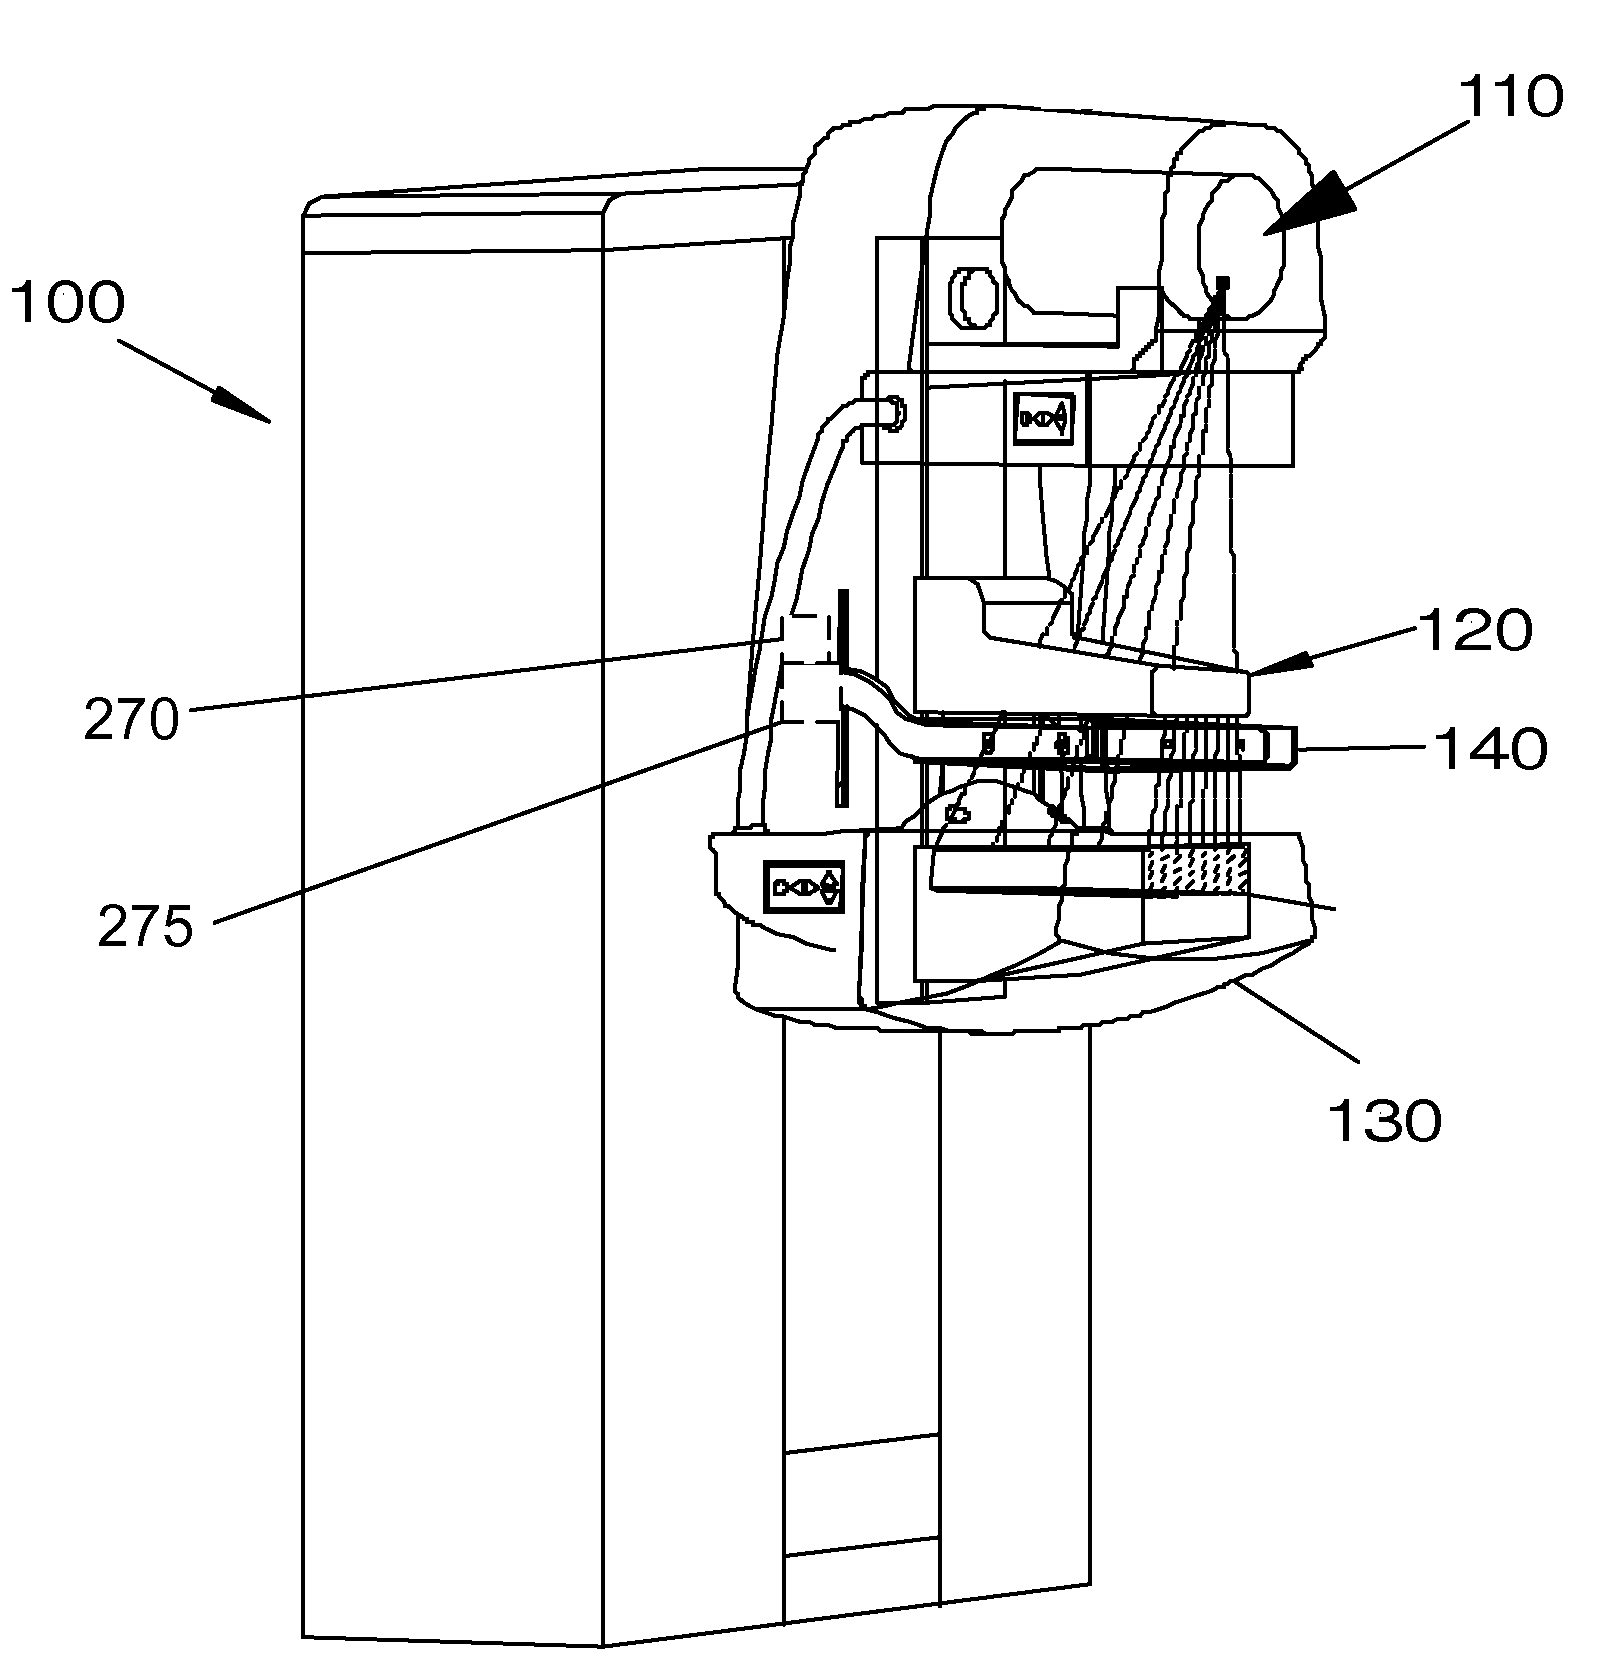 Method and arrangement relating to x-ray imaging